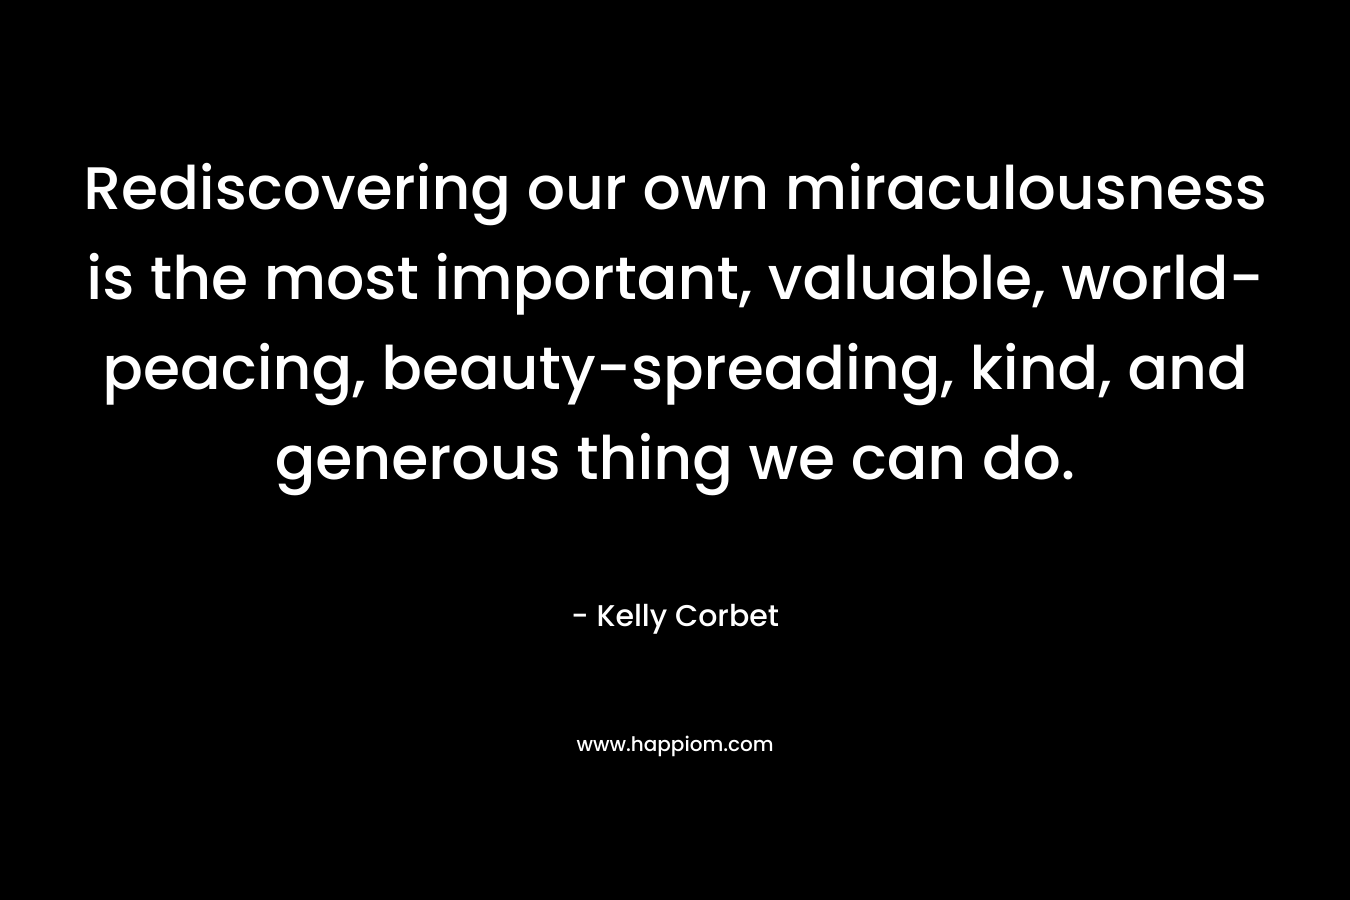 Rediscovering our own miraculousness is the most important, valuable, world-peacing, beauty-spreading, kind, and generous thing we can do. – Kelly Corbet